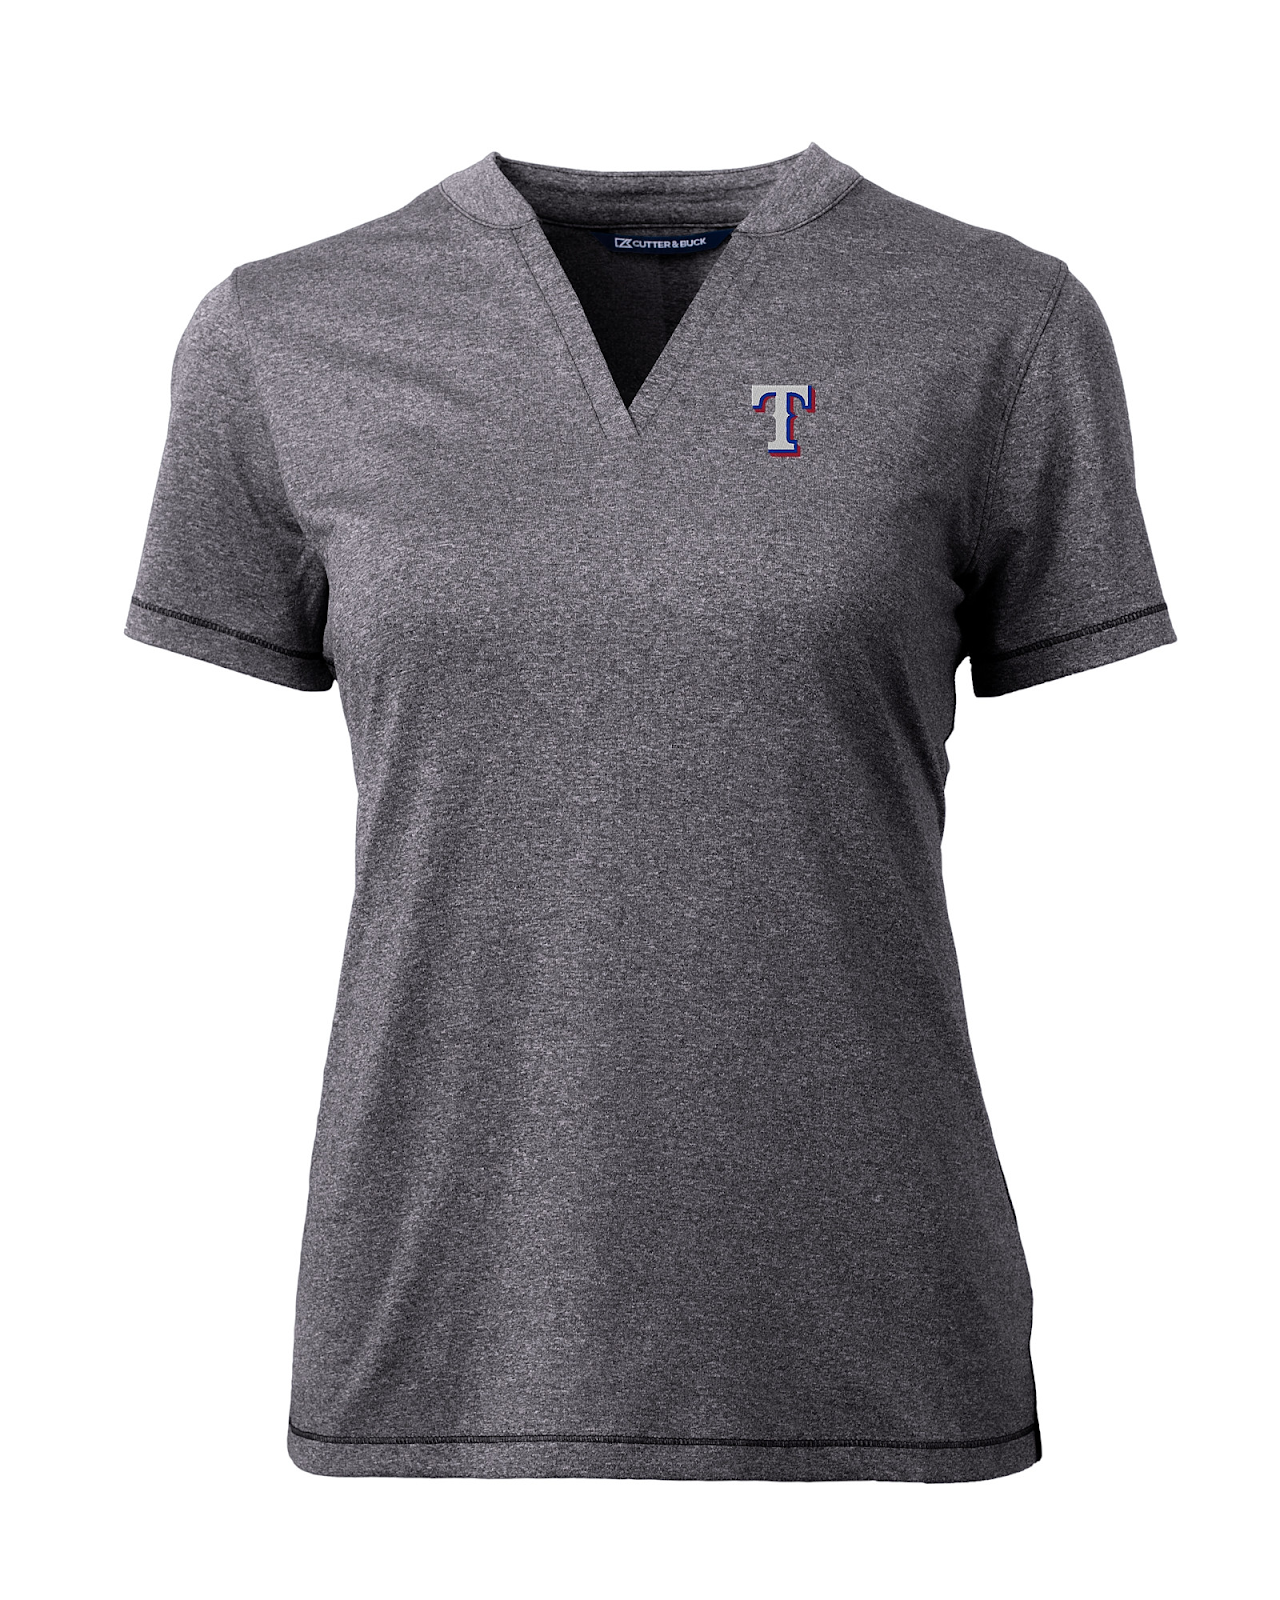 Cutter & Buck Texas Rangers Forge Heathered Stretch Women’s Blade Top in Charcoal Heather/Dark Grey